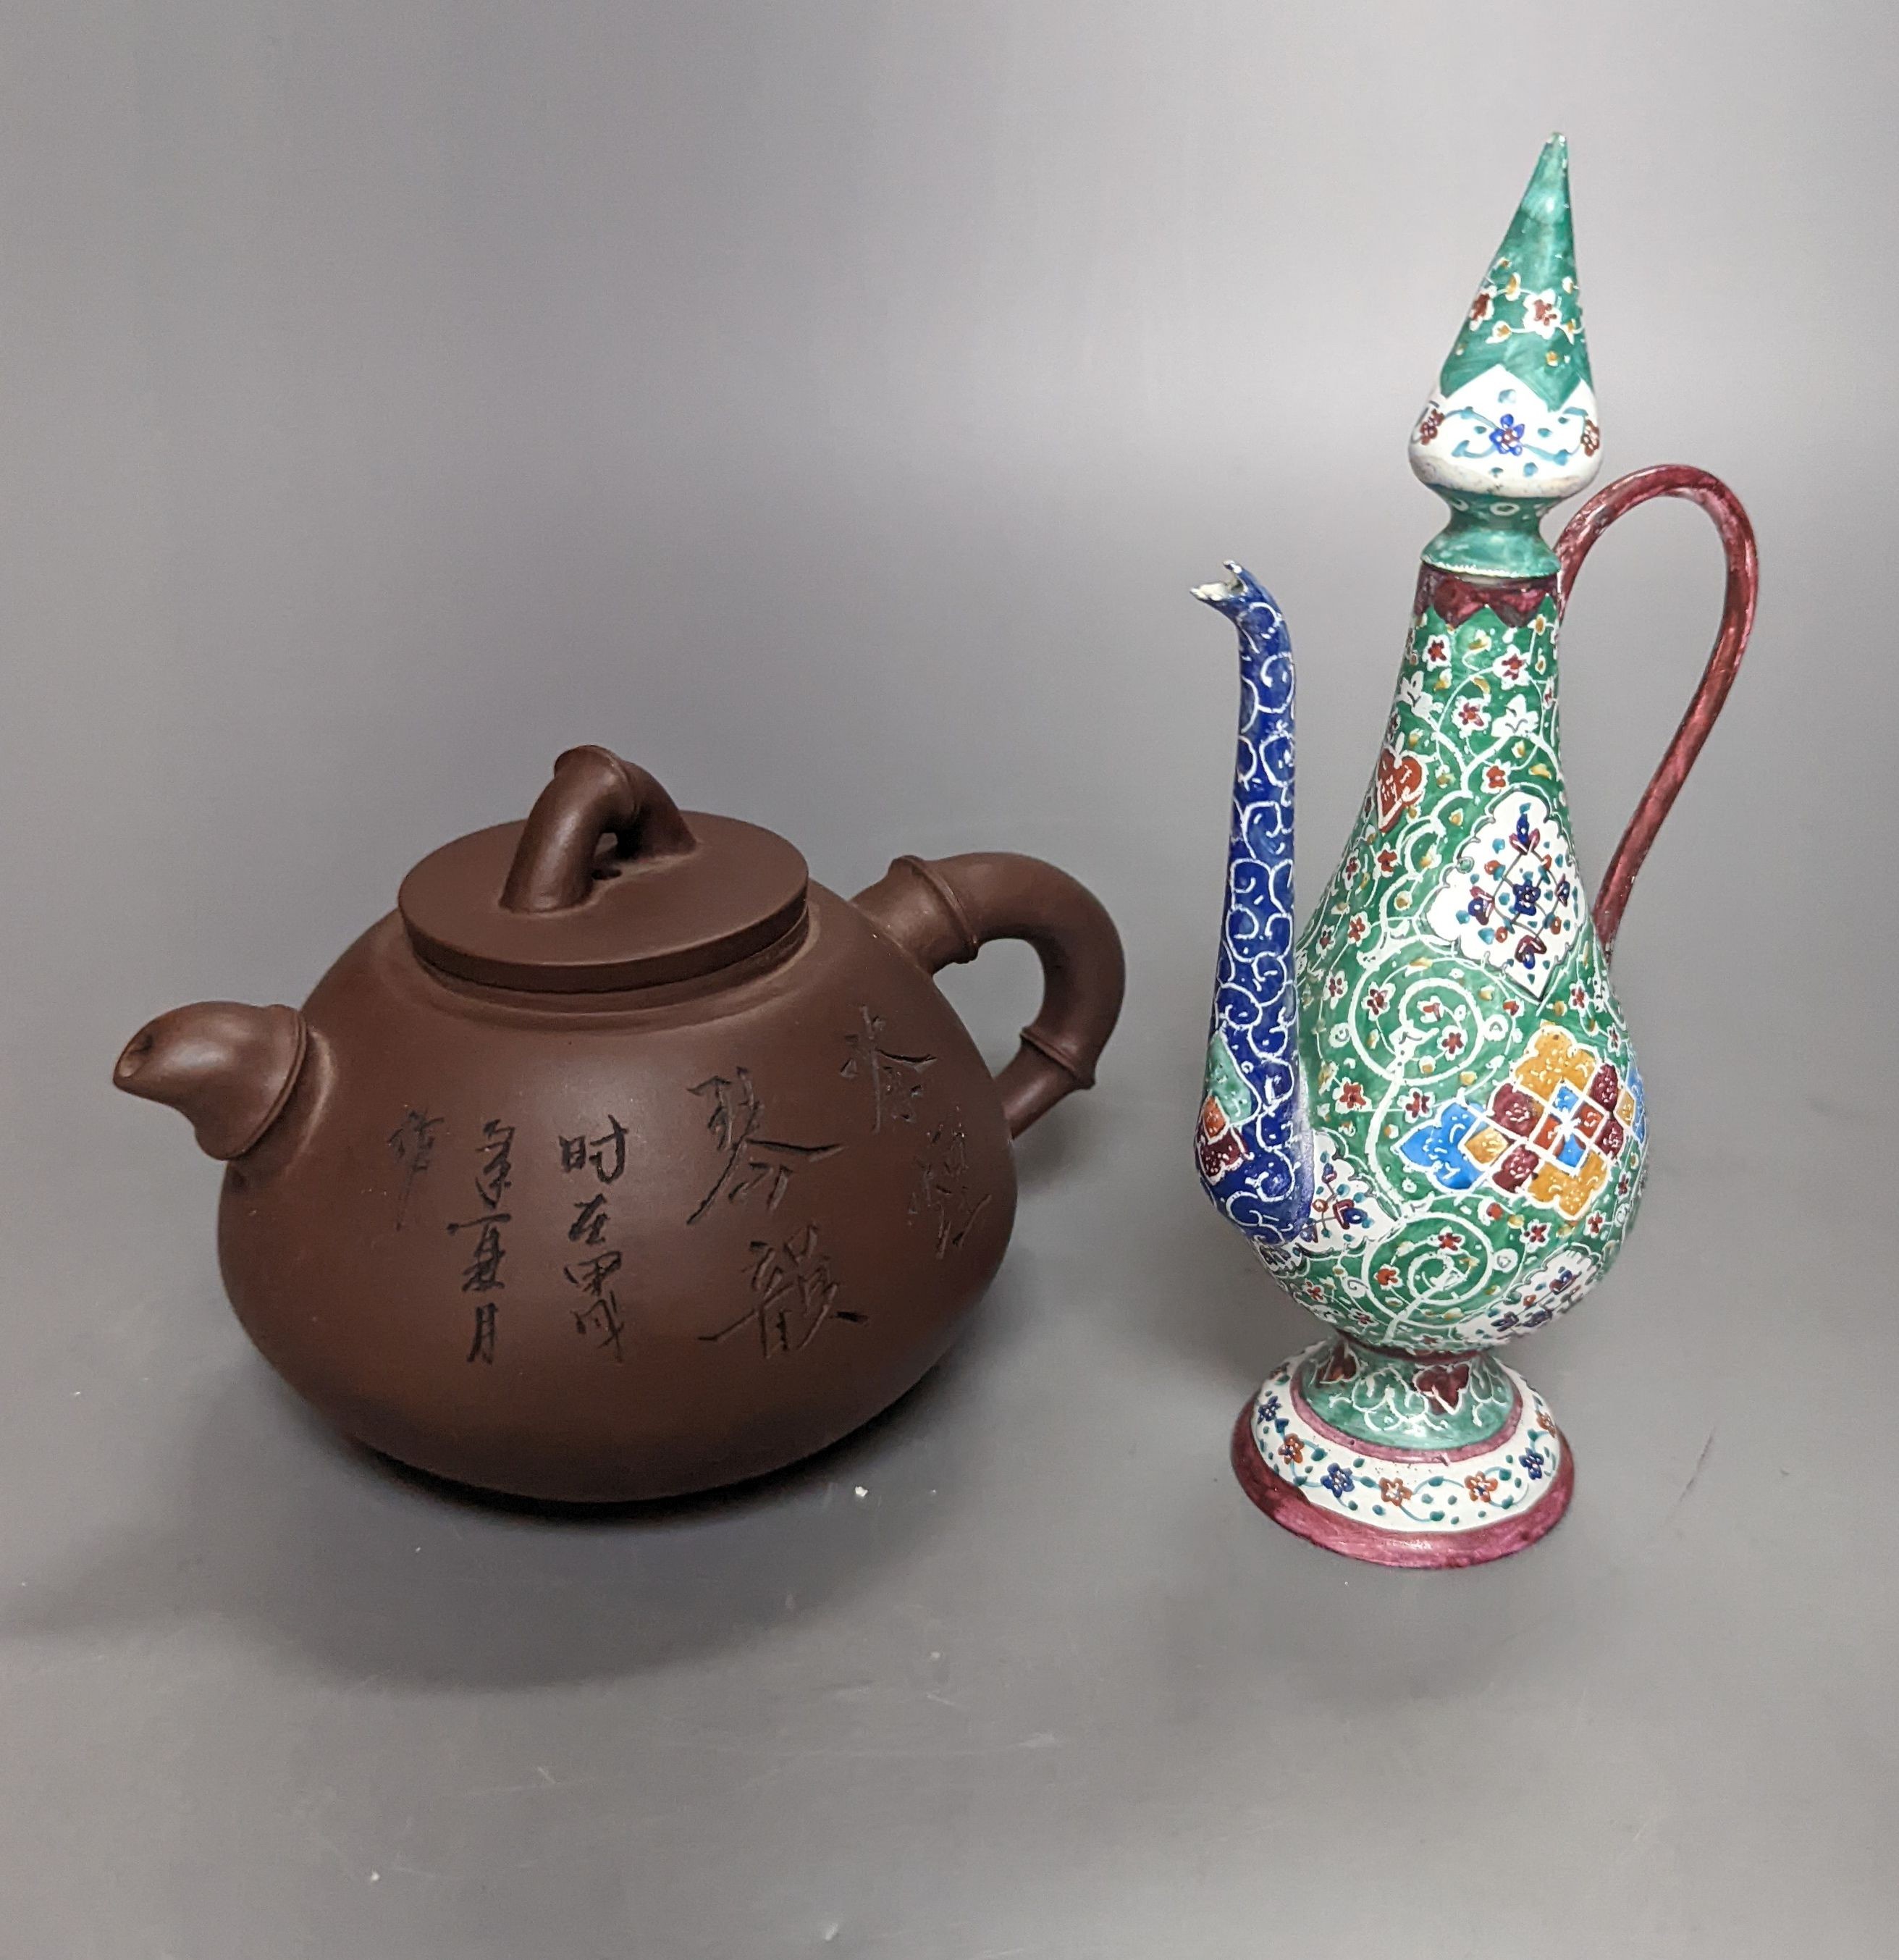 A Chinese Yixing teapot and a Isfahan enamel on copper ewer, 16.5cm high